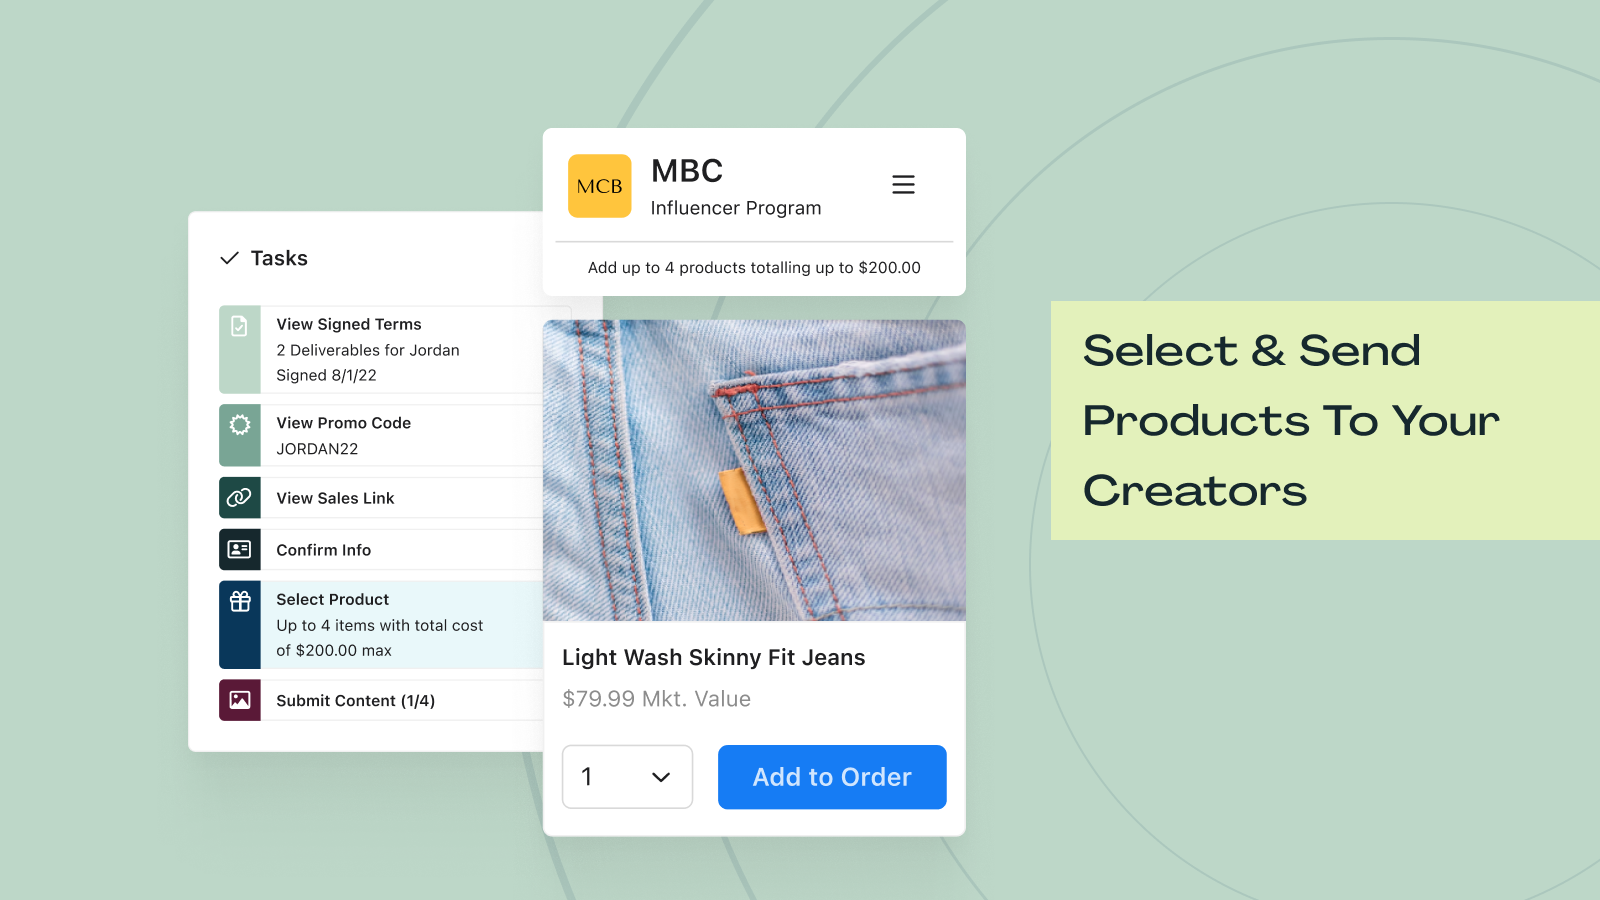 Select & send products to your creators